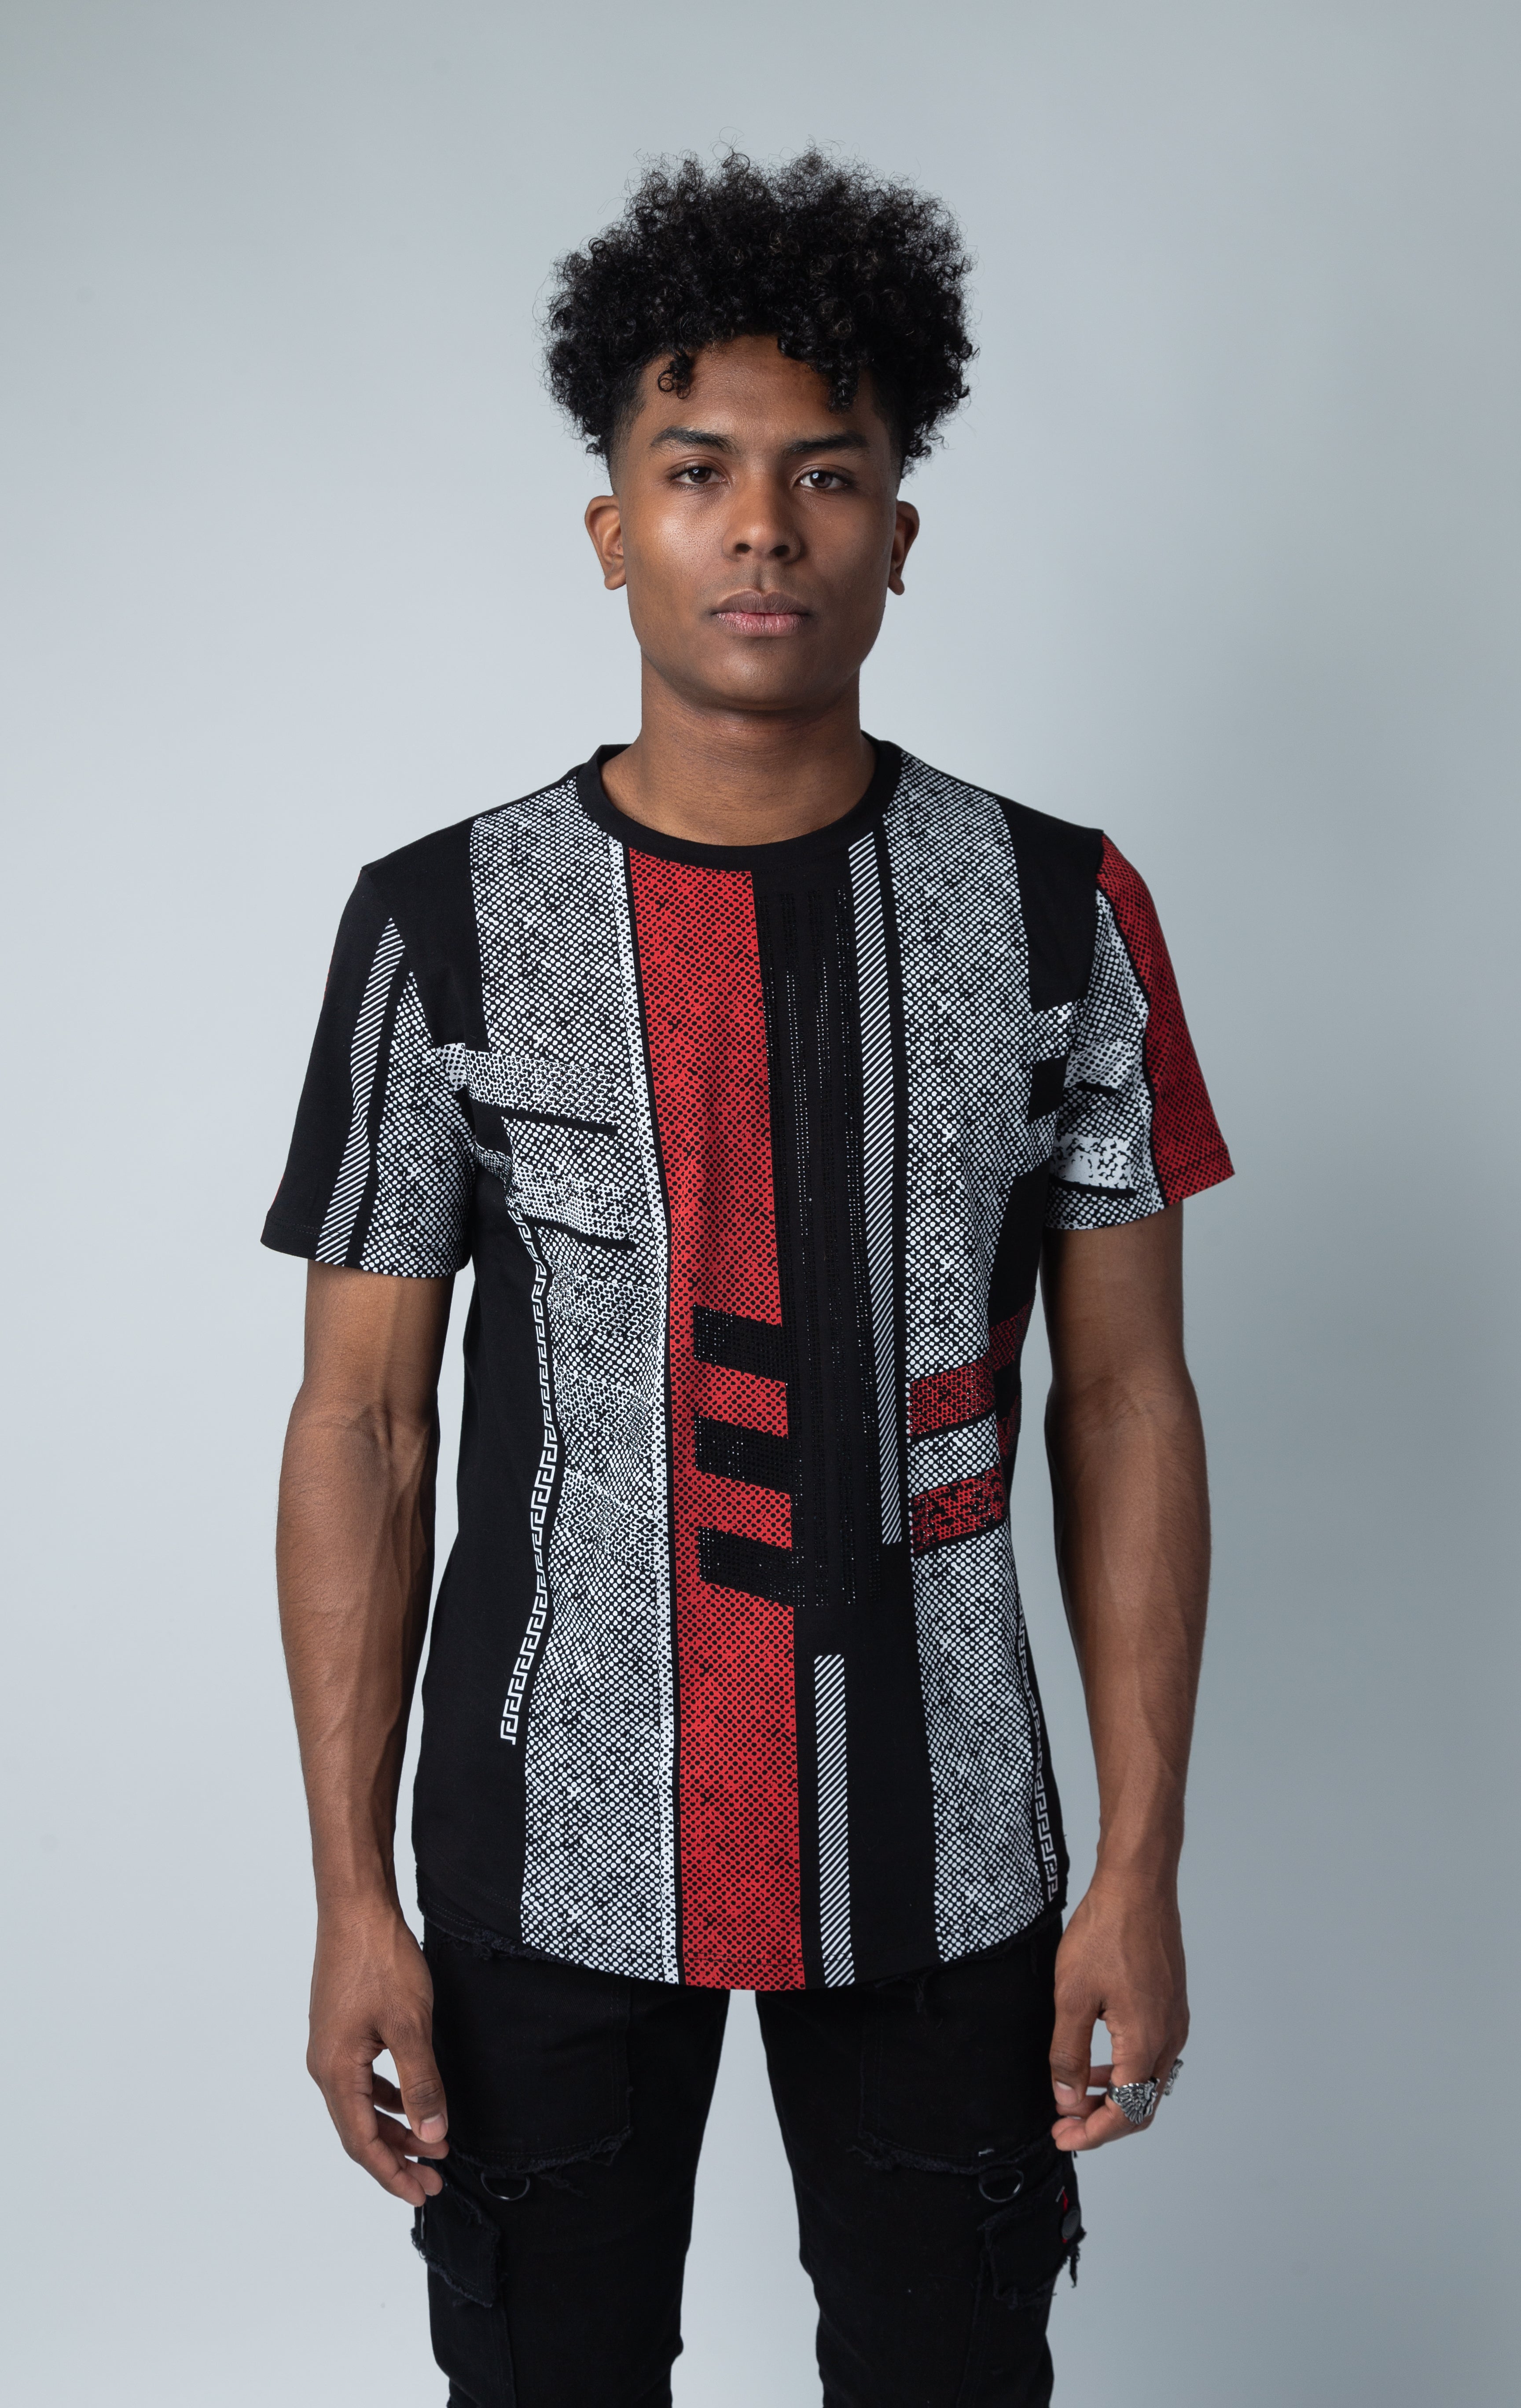 Black t-shirt with red and white pattern and rhinestone design.